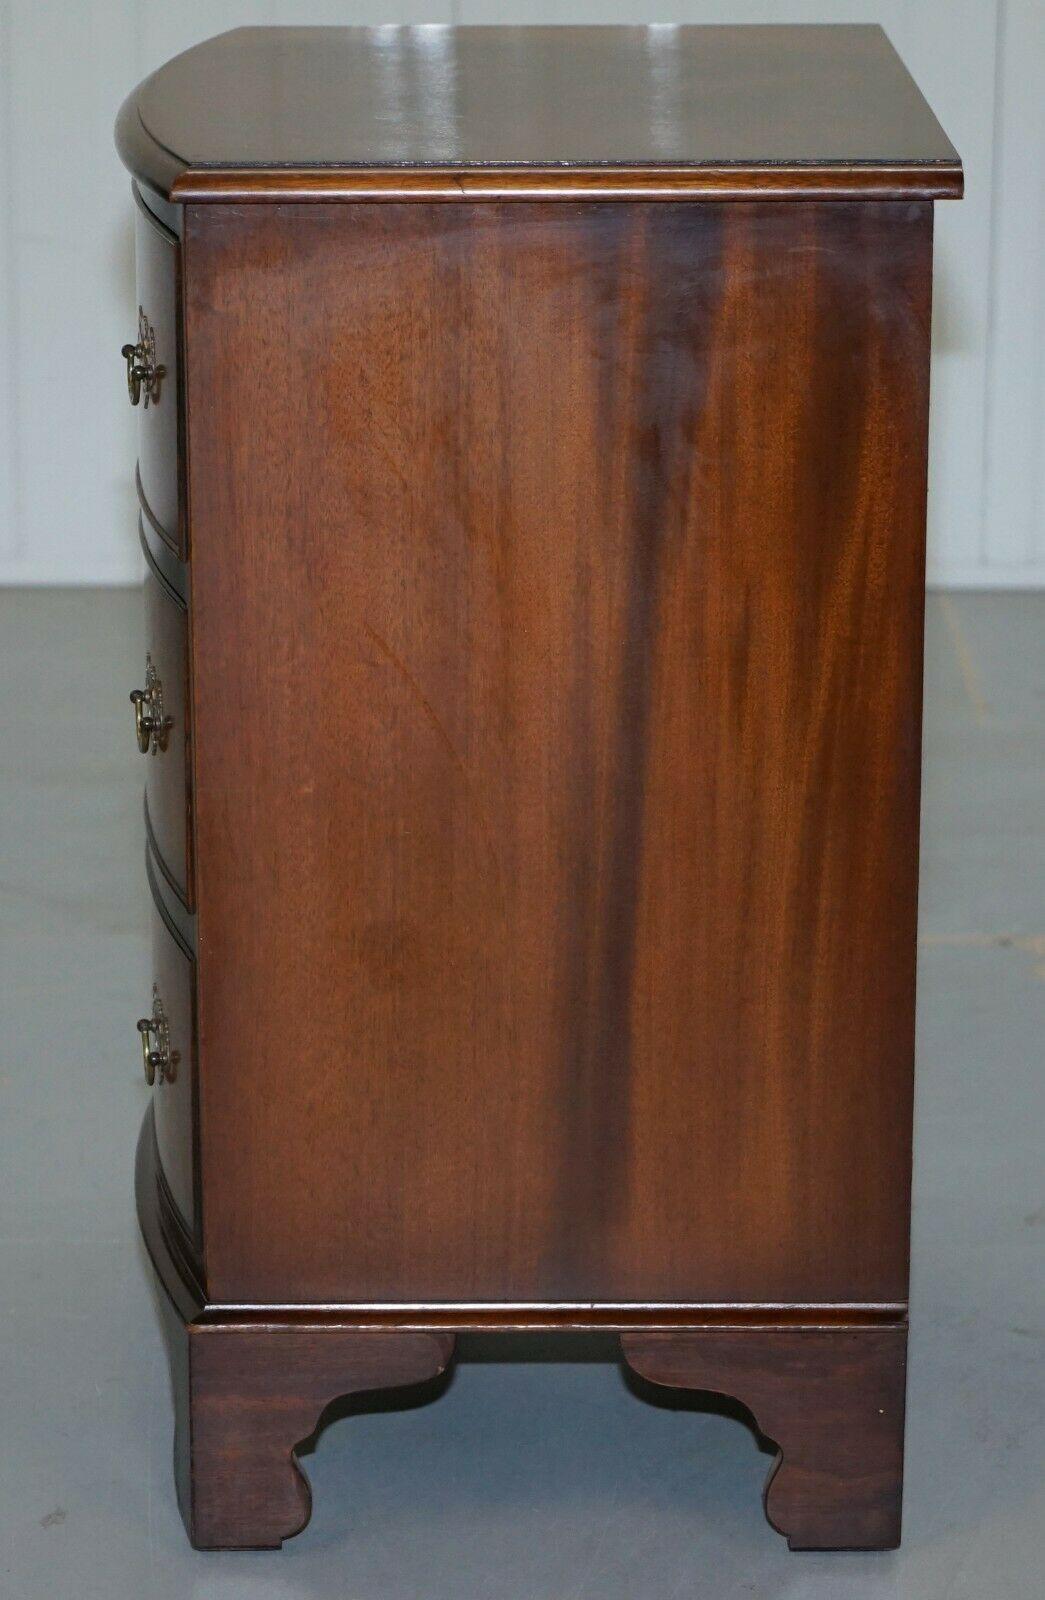 Vintage 1960s Burton Furniture Ltd Flamed Mahogany Side Table Chest of Drawers 2